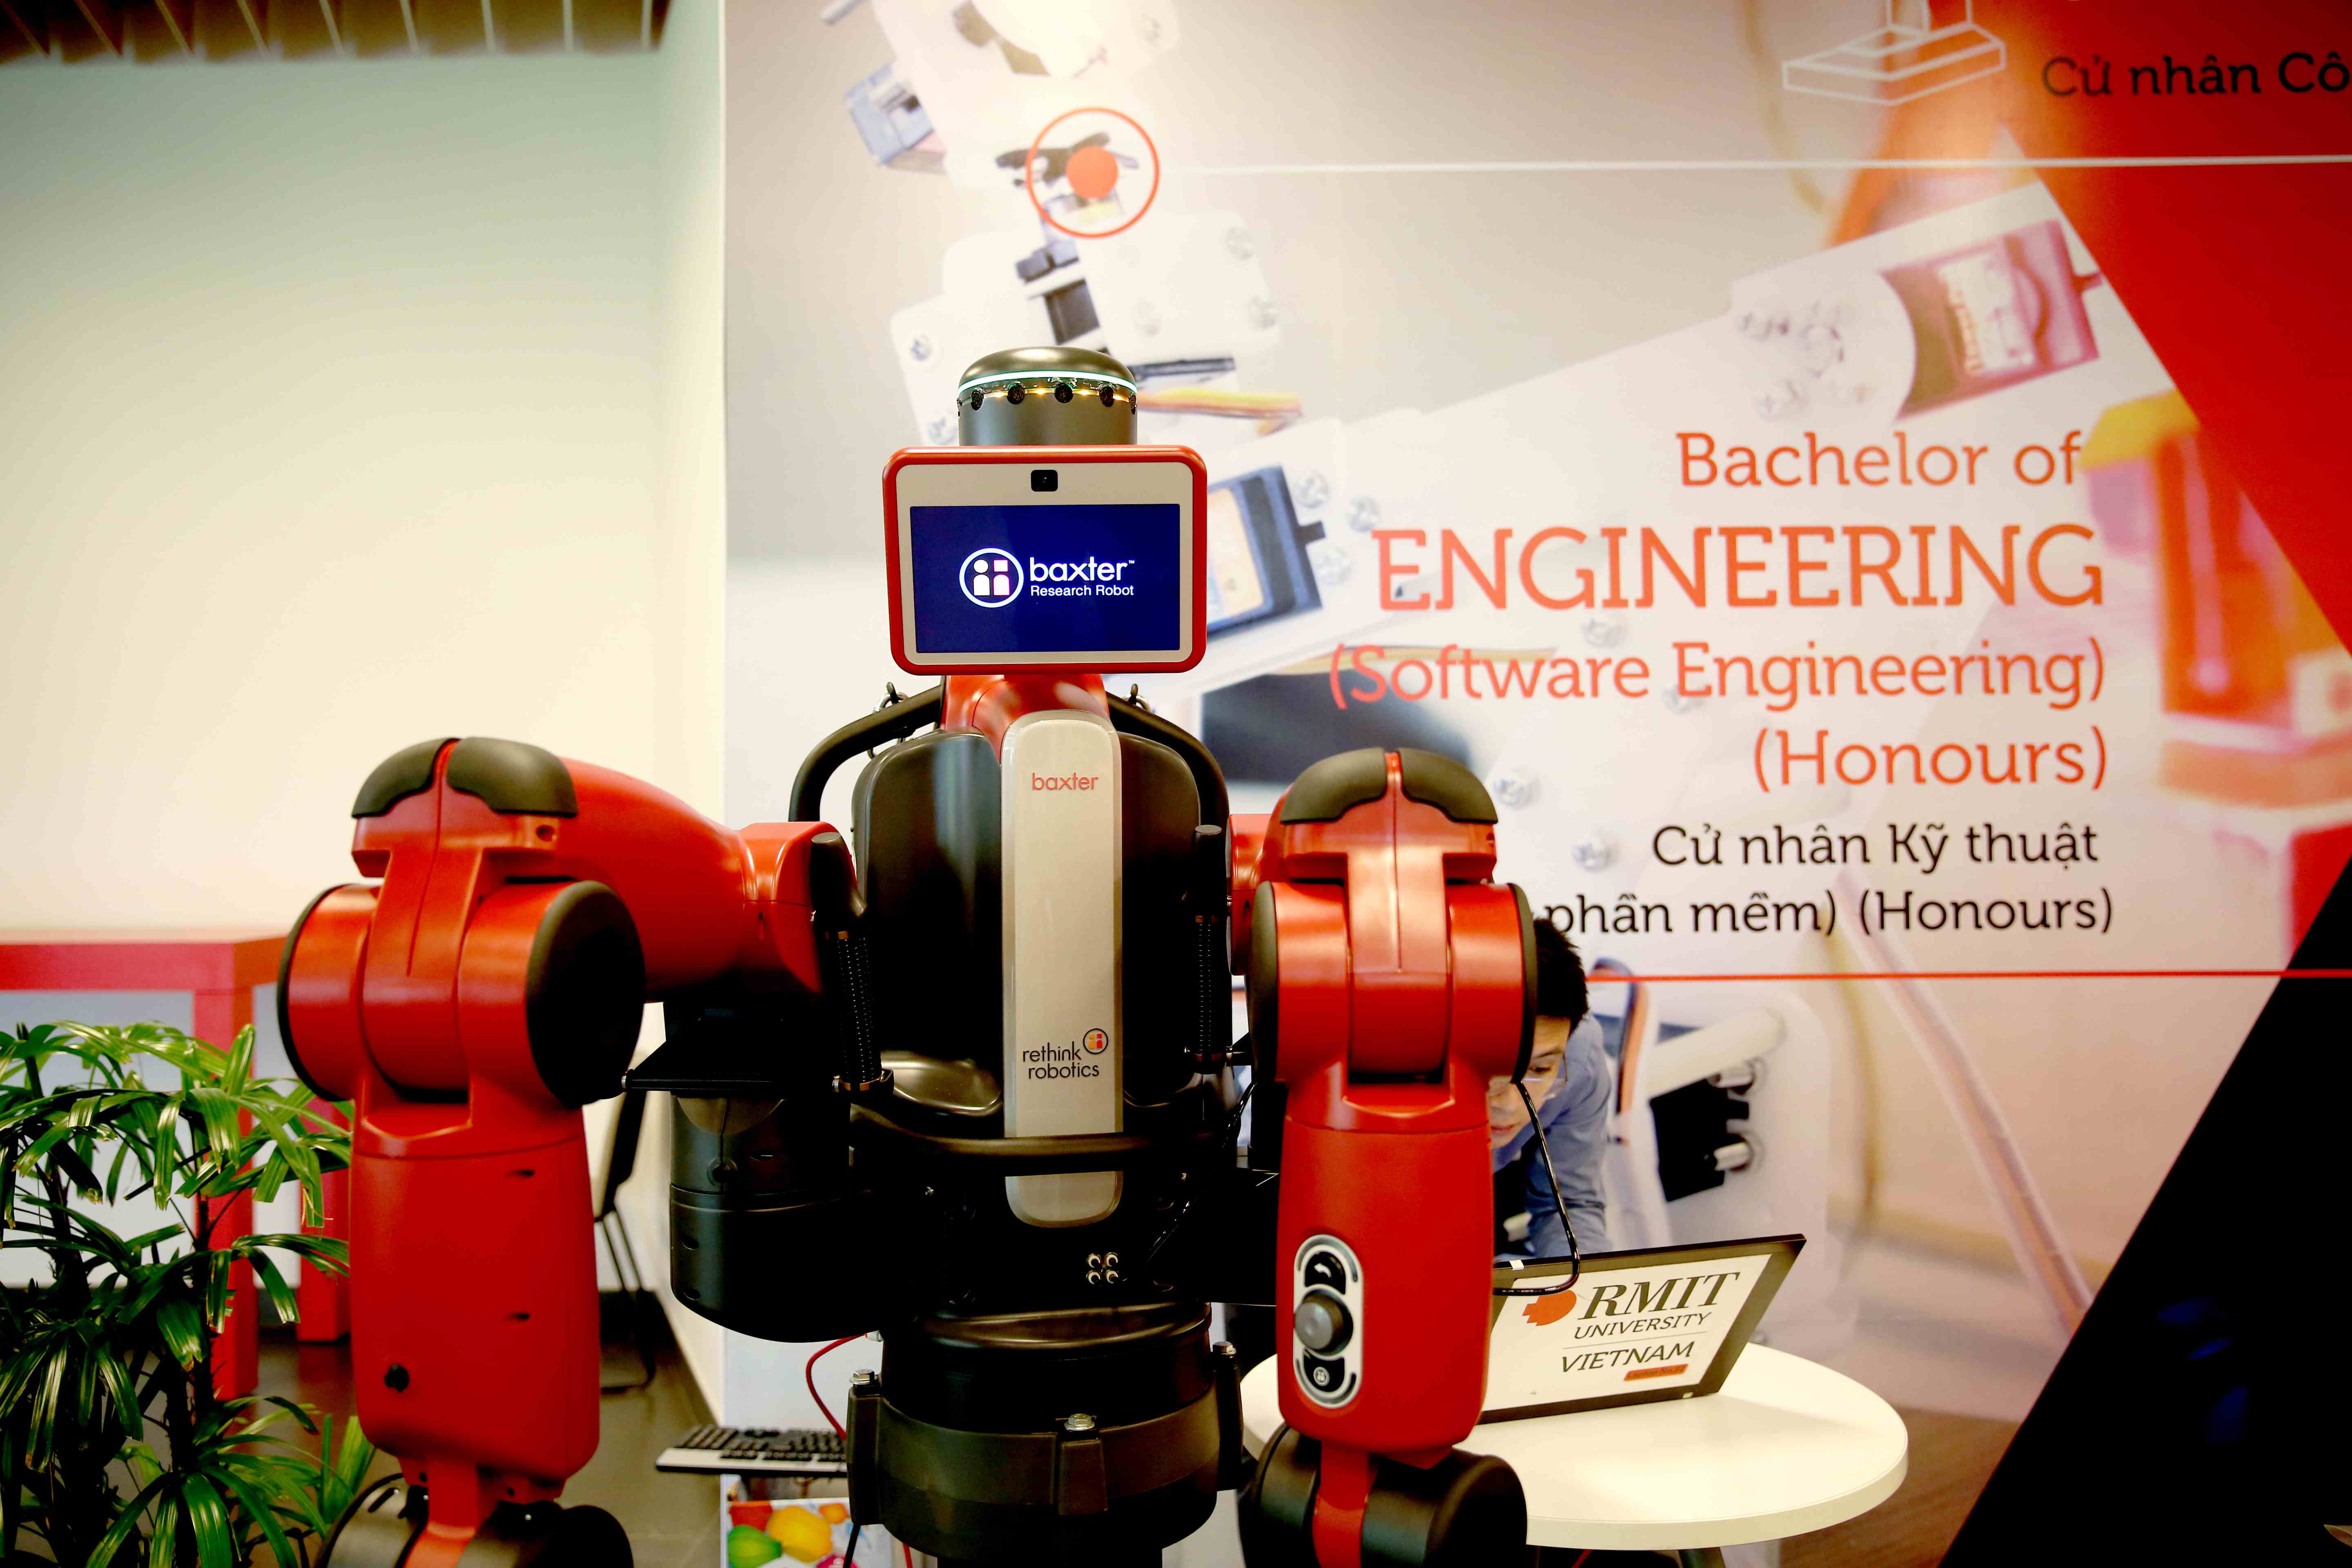 One of the stars of the day was Baxter, RMIT Vietnam’s own educational robot.